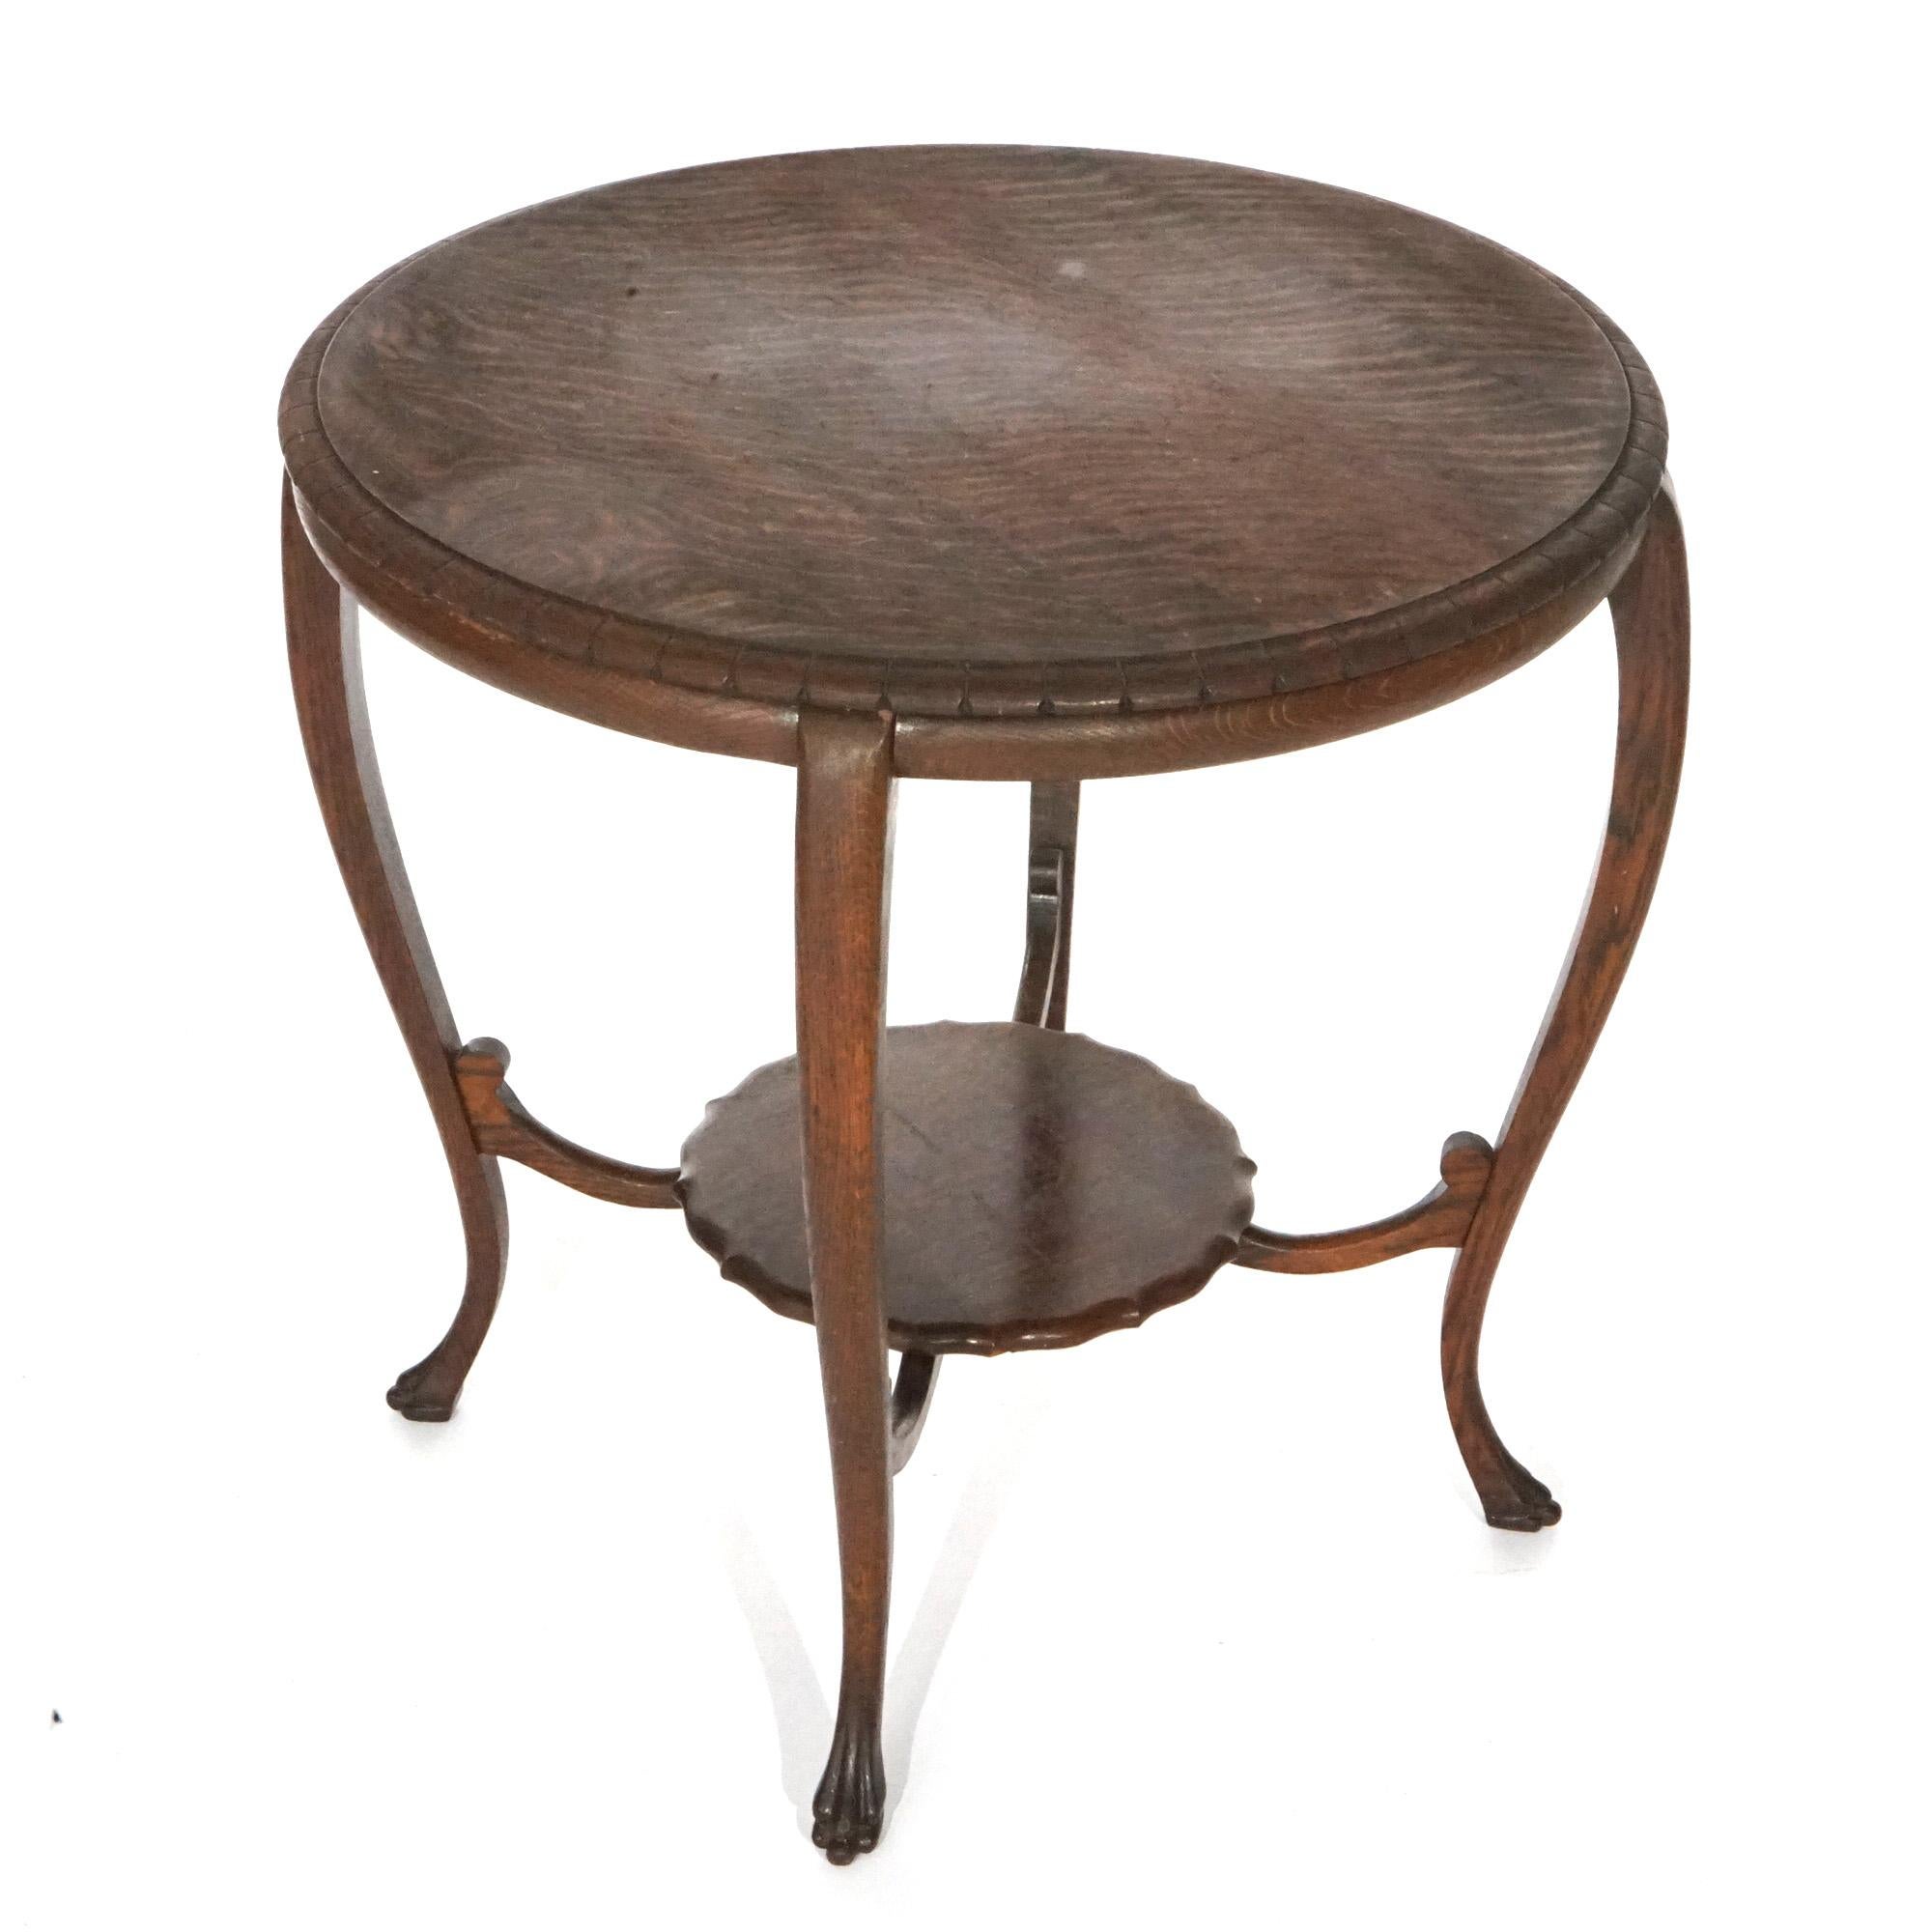 20th Century Antique Quartersawn Oak Parlor Table with Paw Feet, Circa 1900 For Sale